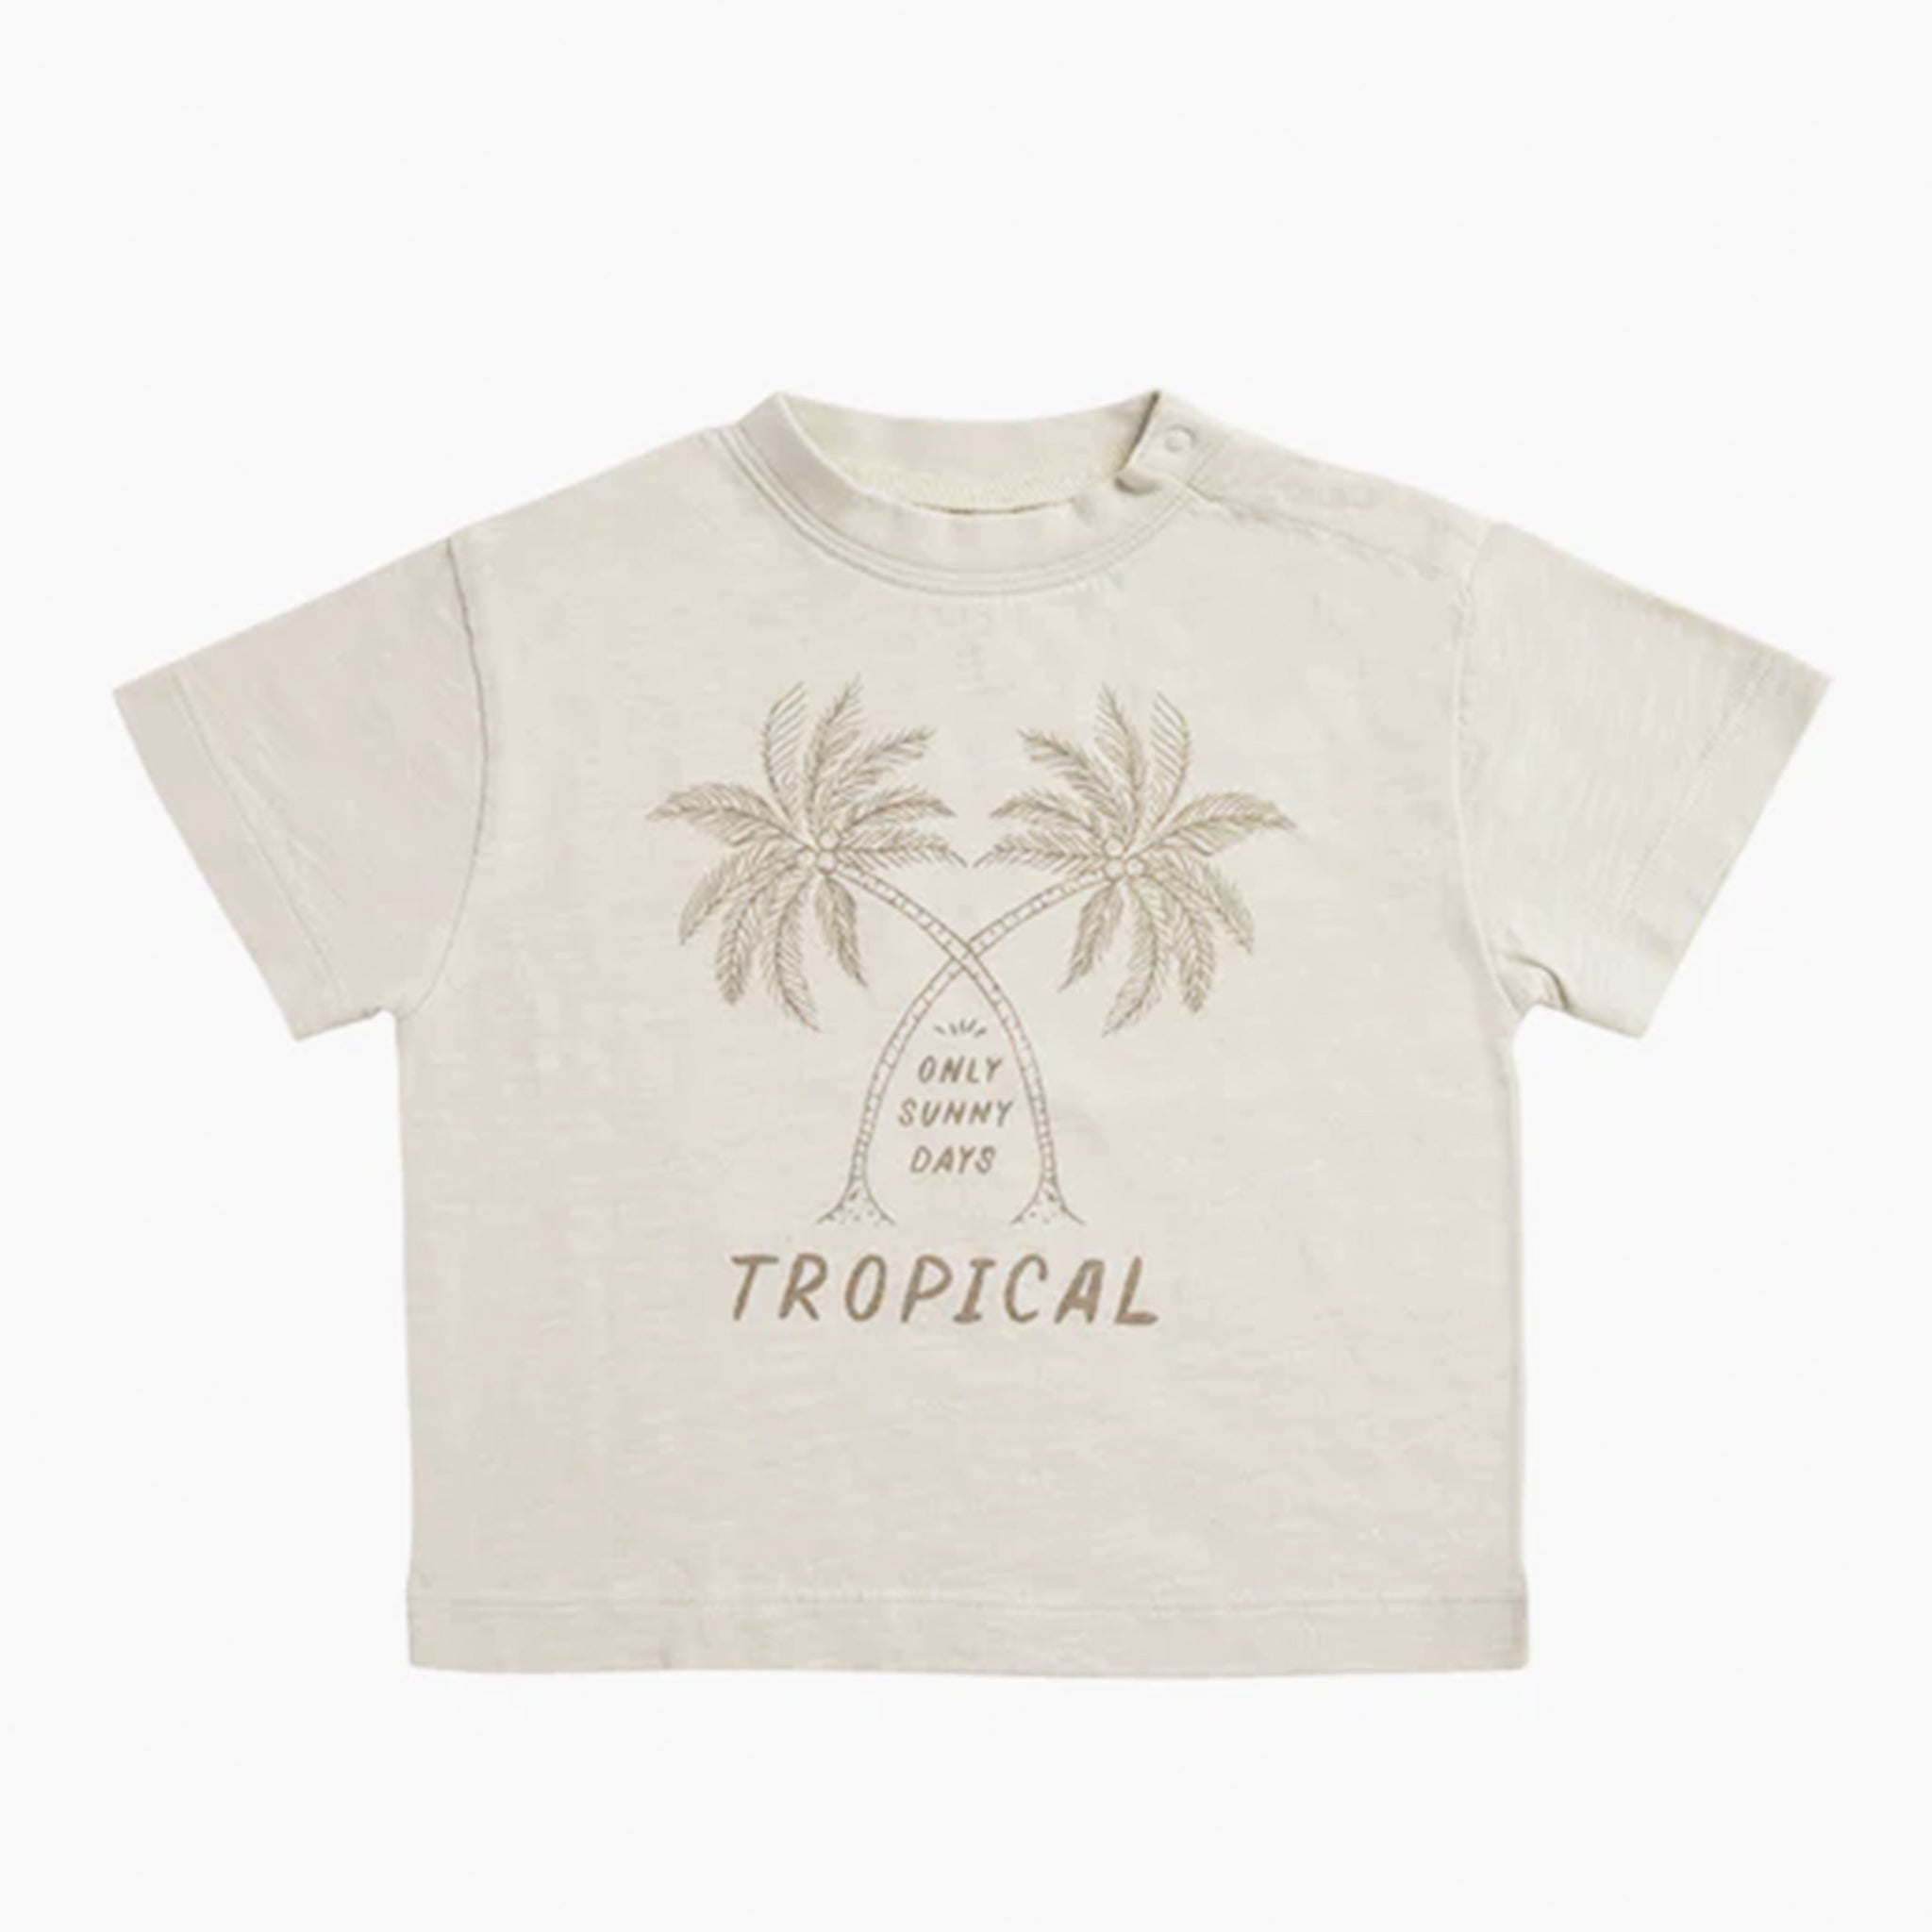 A neutral t-shirt with a palm tree graphic on the front and text in between that reads, "Only Sunny Days Tropical".